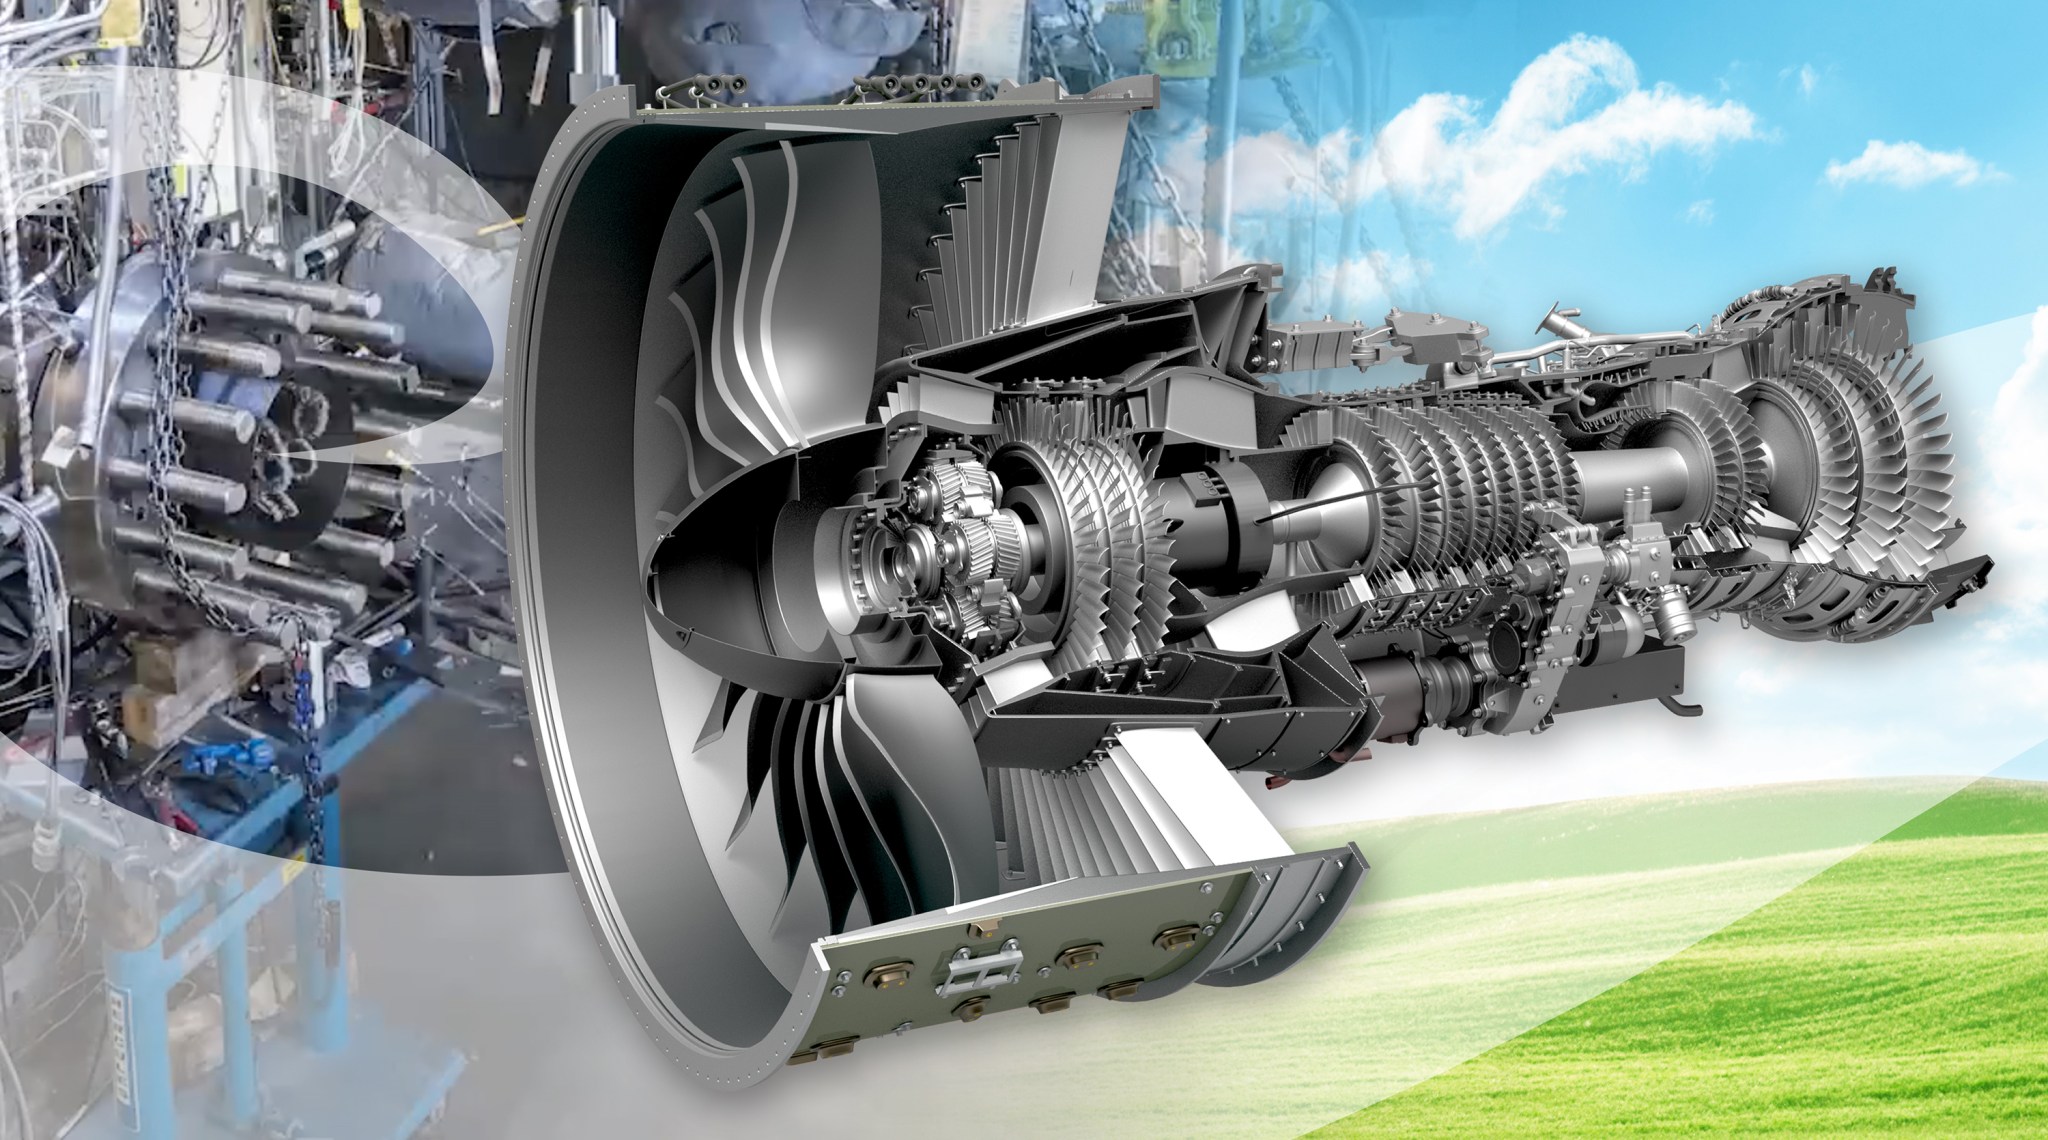 Technical rendering and cutaway view of mechanical turbofan jet with multiple layers of fan blades and other metal components.